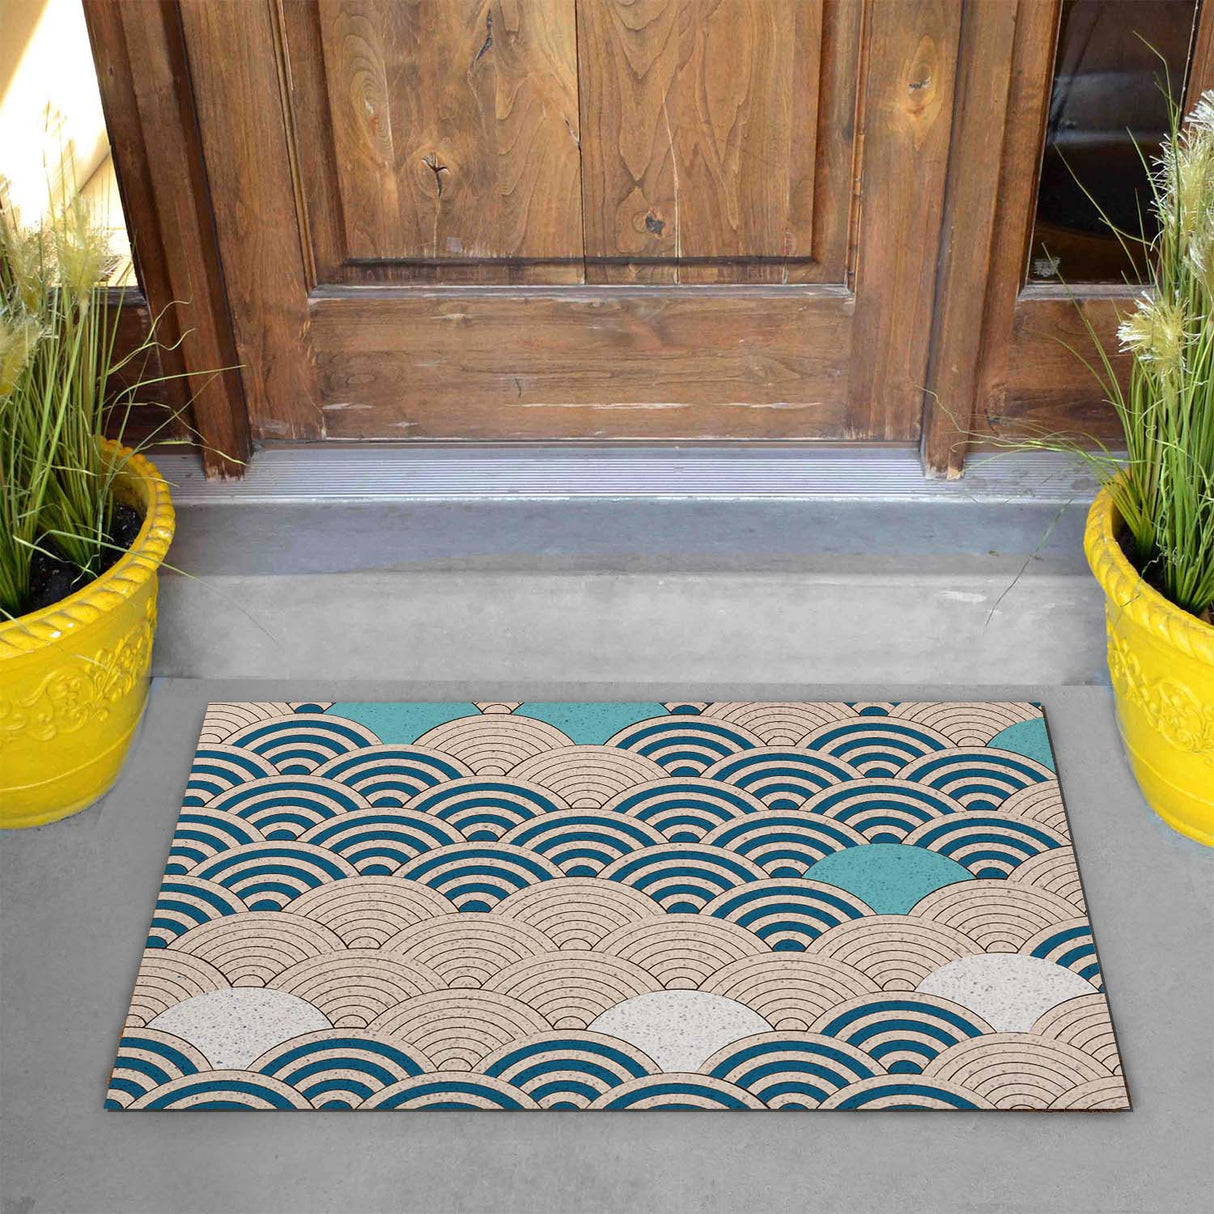 Feblilac Yellow and Blue Waves PVC Coil Door Mat